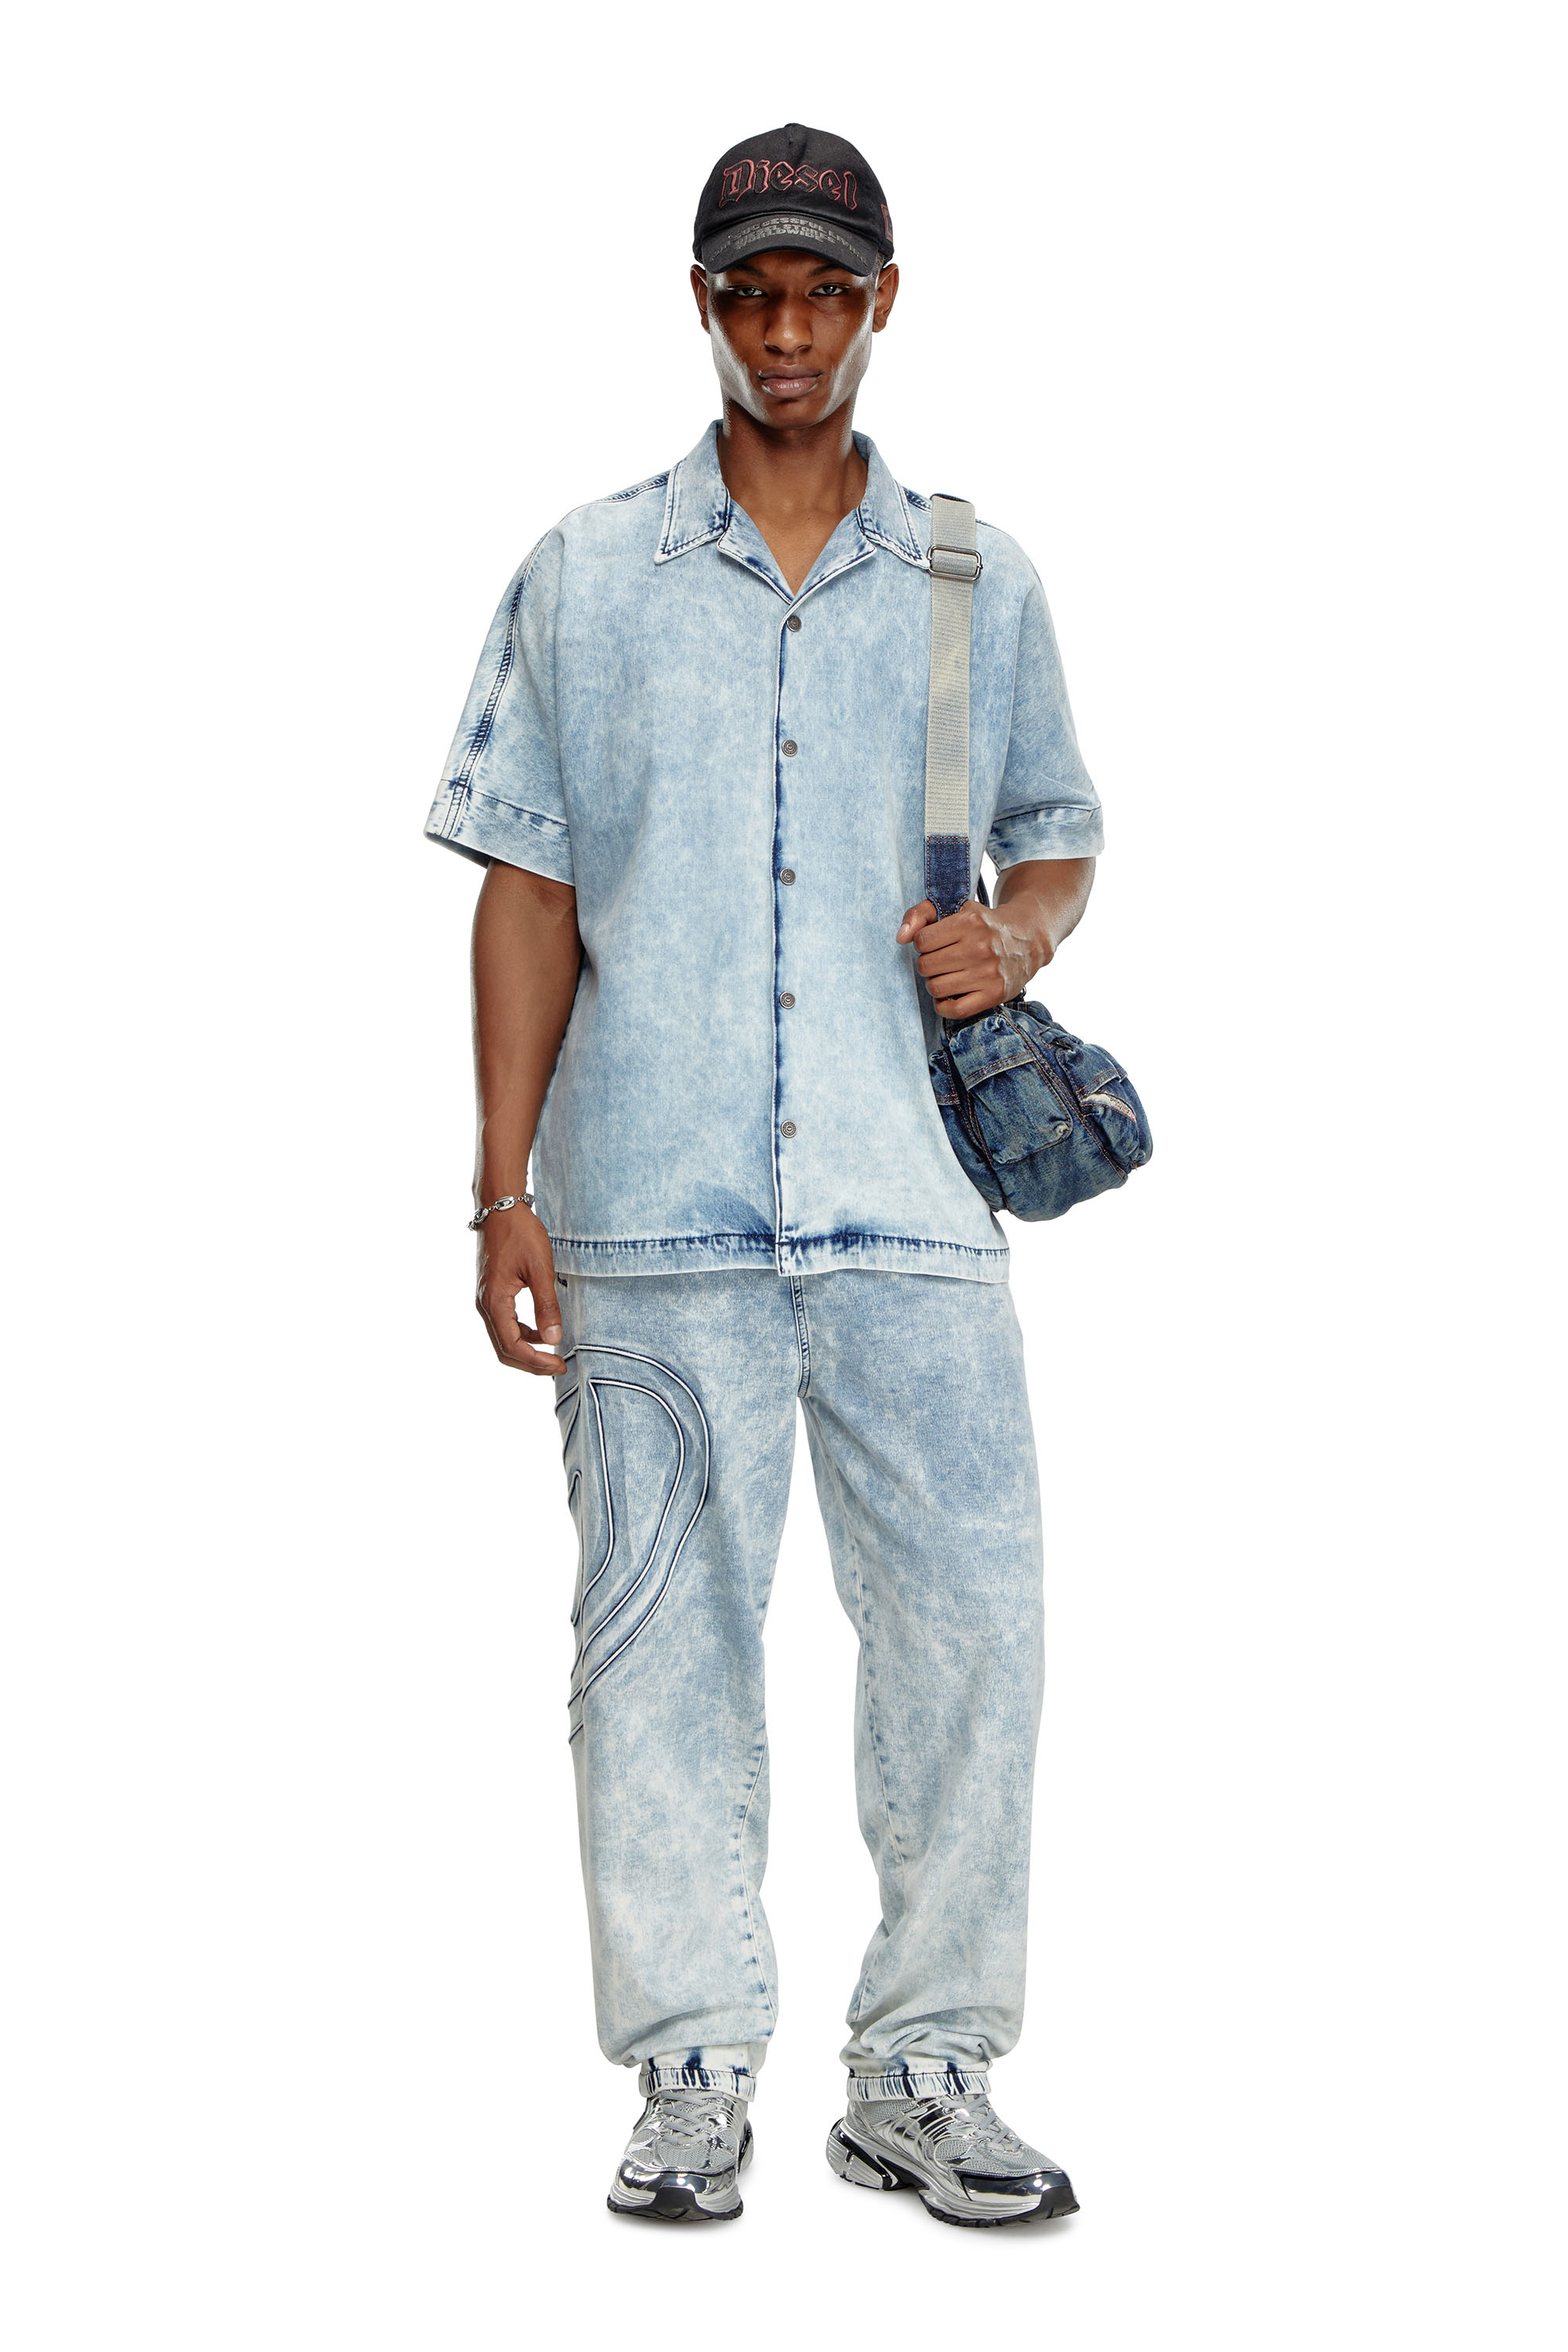 Diesel - D-NABIL-S, Male Denim bowling shirt with Oval D in ブルー - Image 2